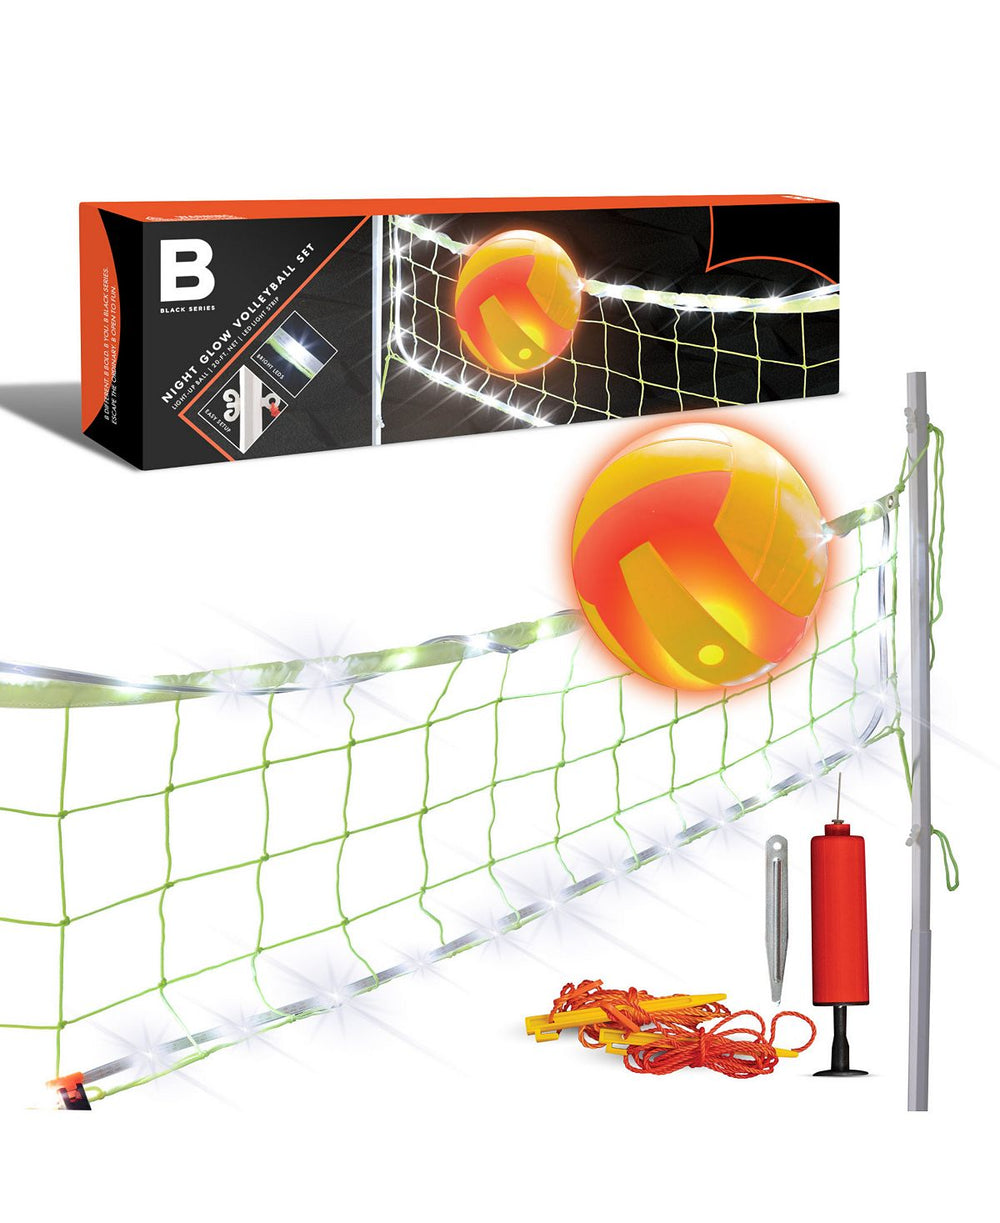 Black Series Night Glow LED Volleyball and Net Set for Outdoor Play